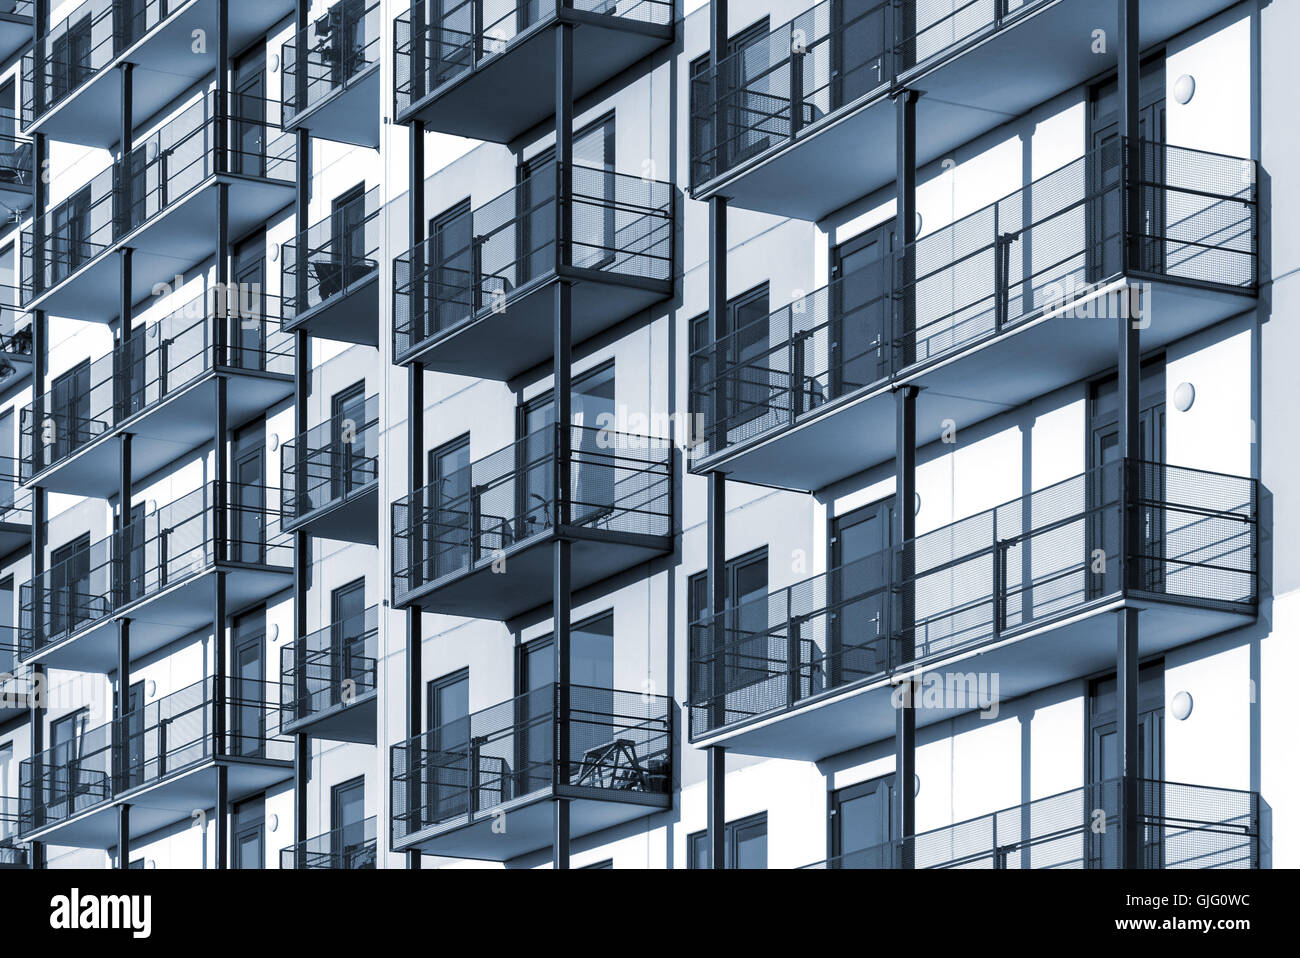 Blue colorized construction background picture of modern apartment building with balconies Stock Photo